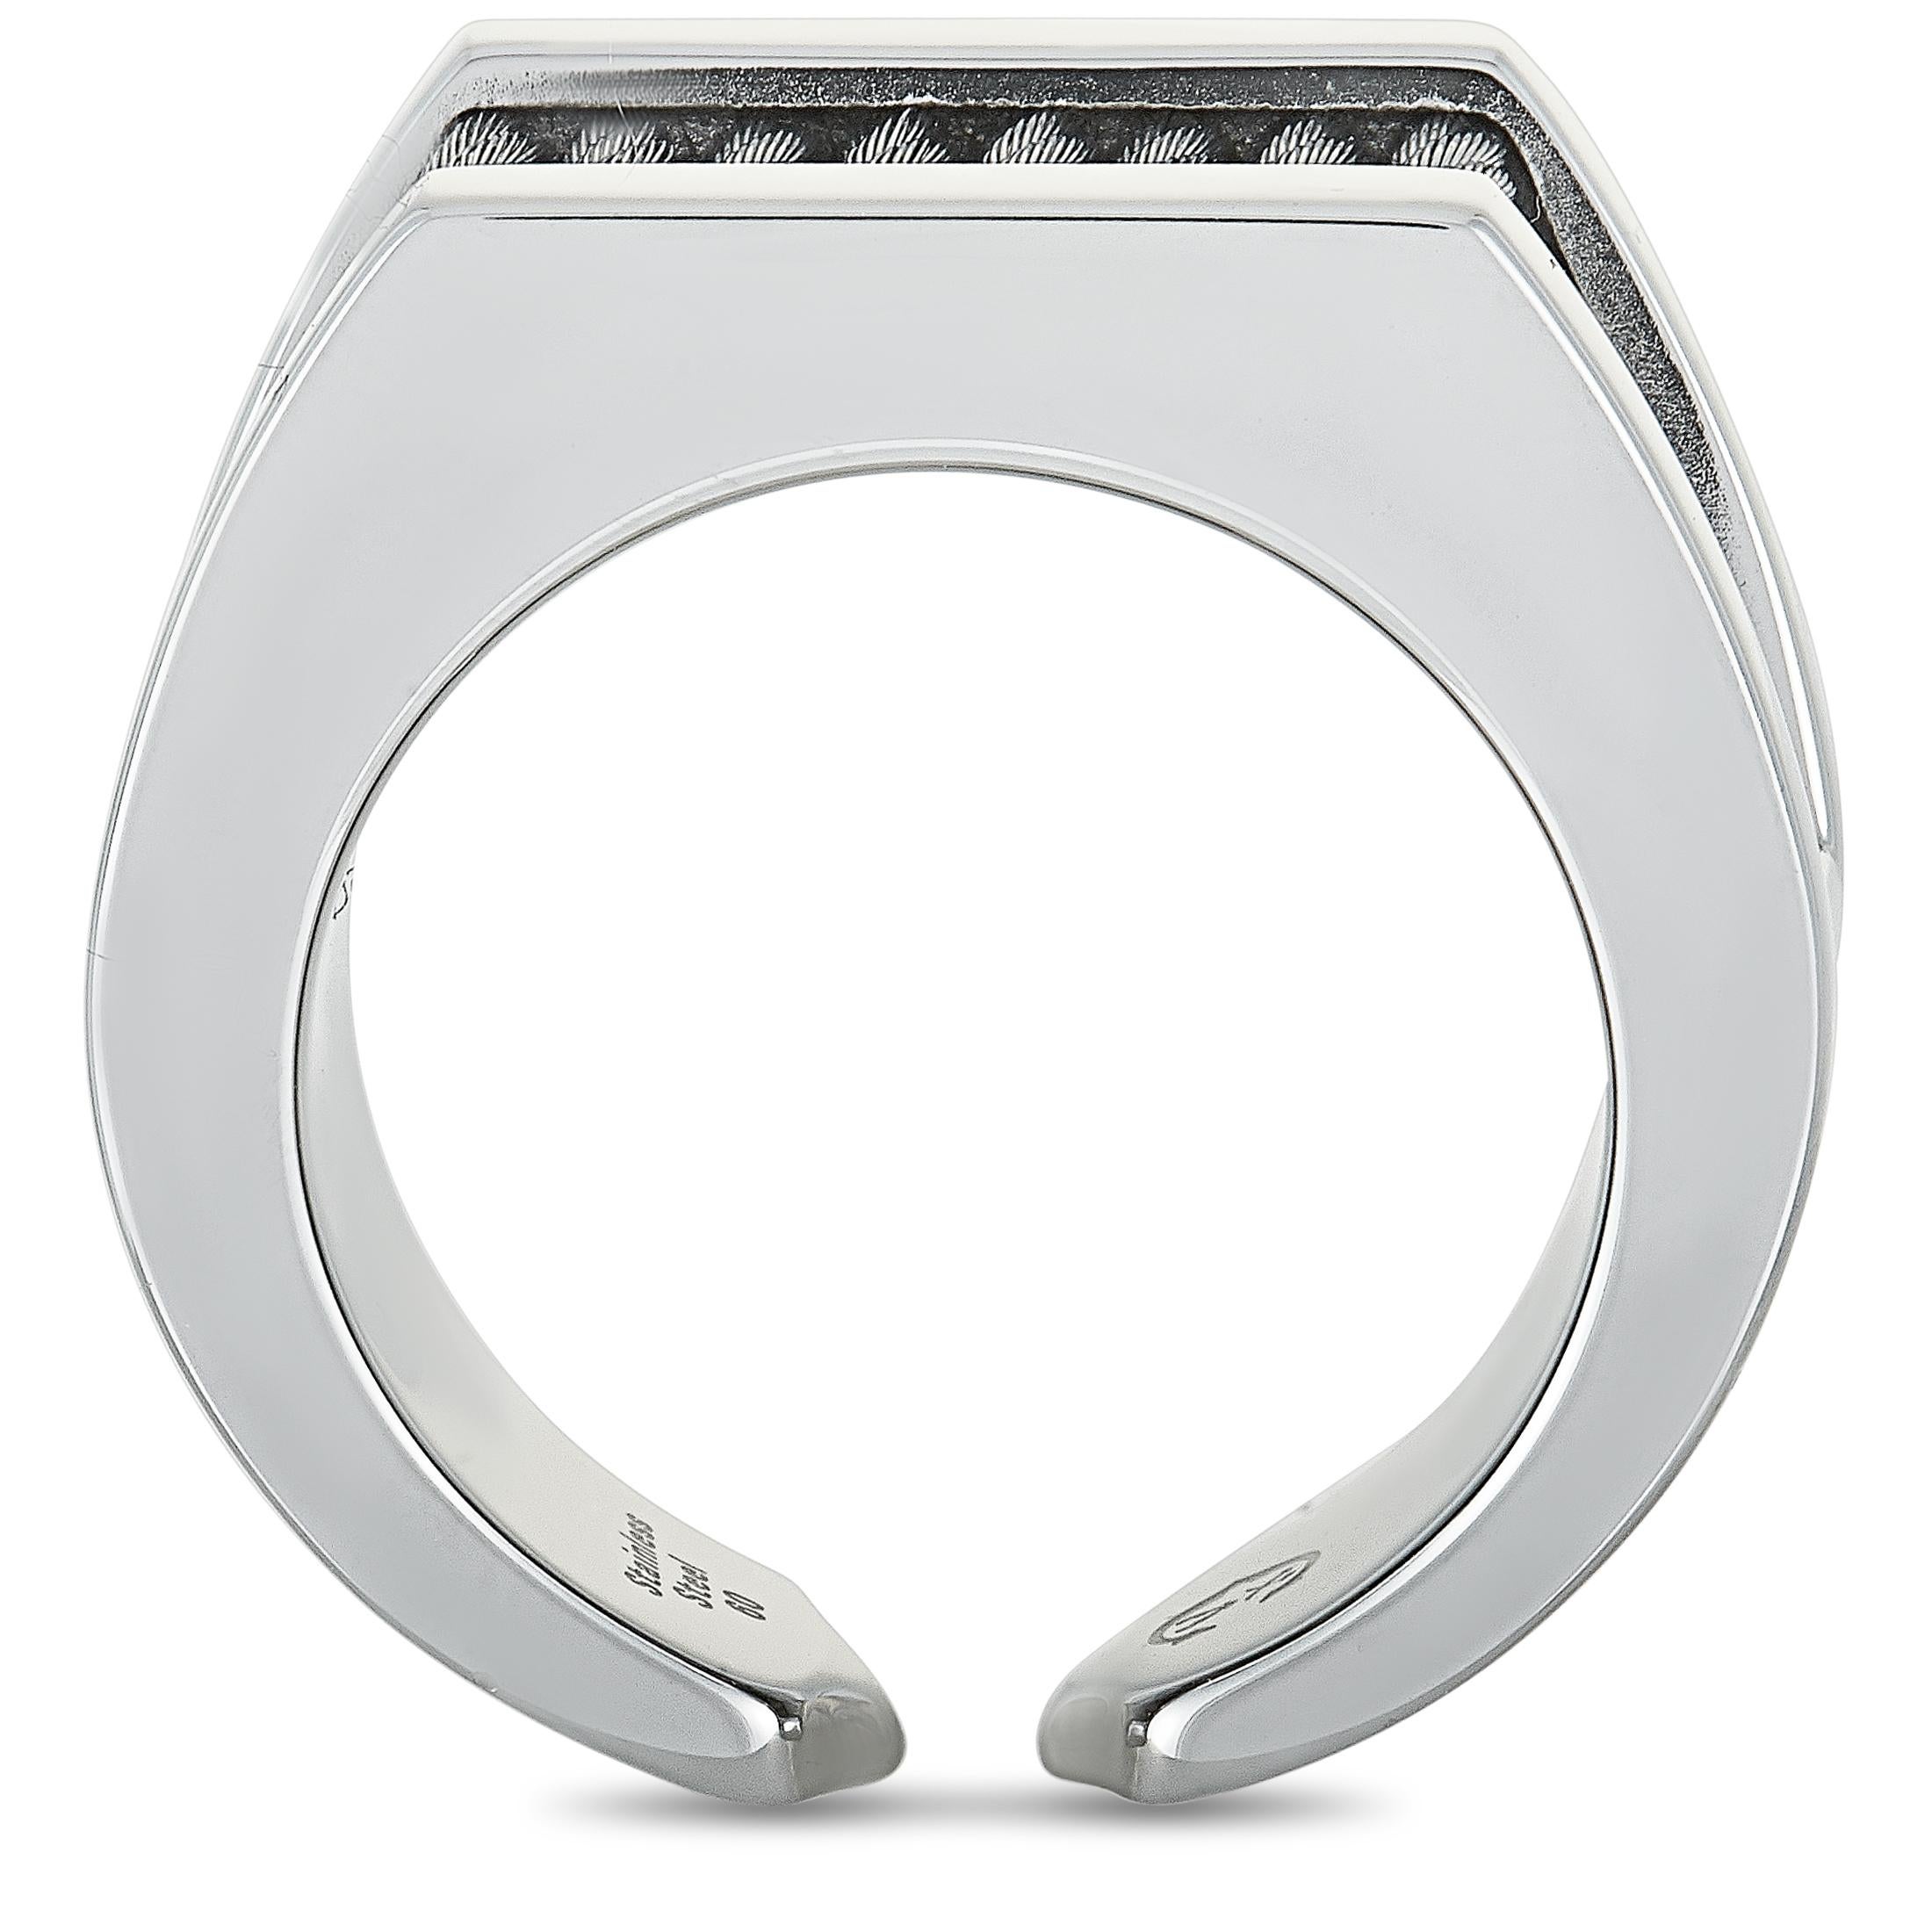 The Charriol “Forever” ring is crafted from stainless steel and weighs 14.8 grams. The ring boasts band thickness of 6 mm and top height of 5 mm, while top dimensions measure 25 by 14 mm.
Ring Size: 9

This item is offered in brand new condition and